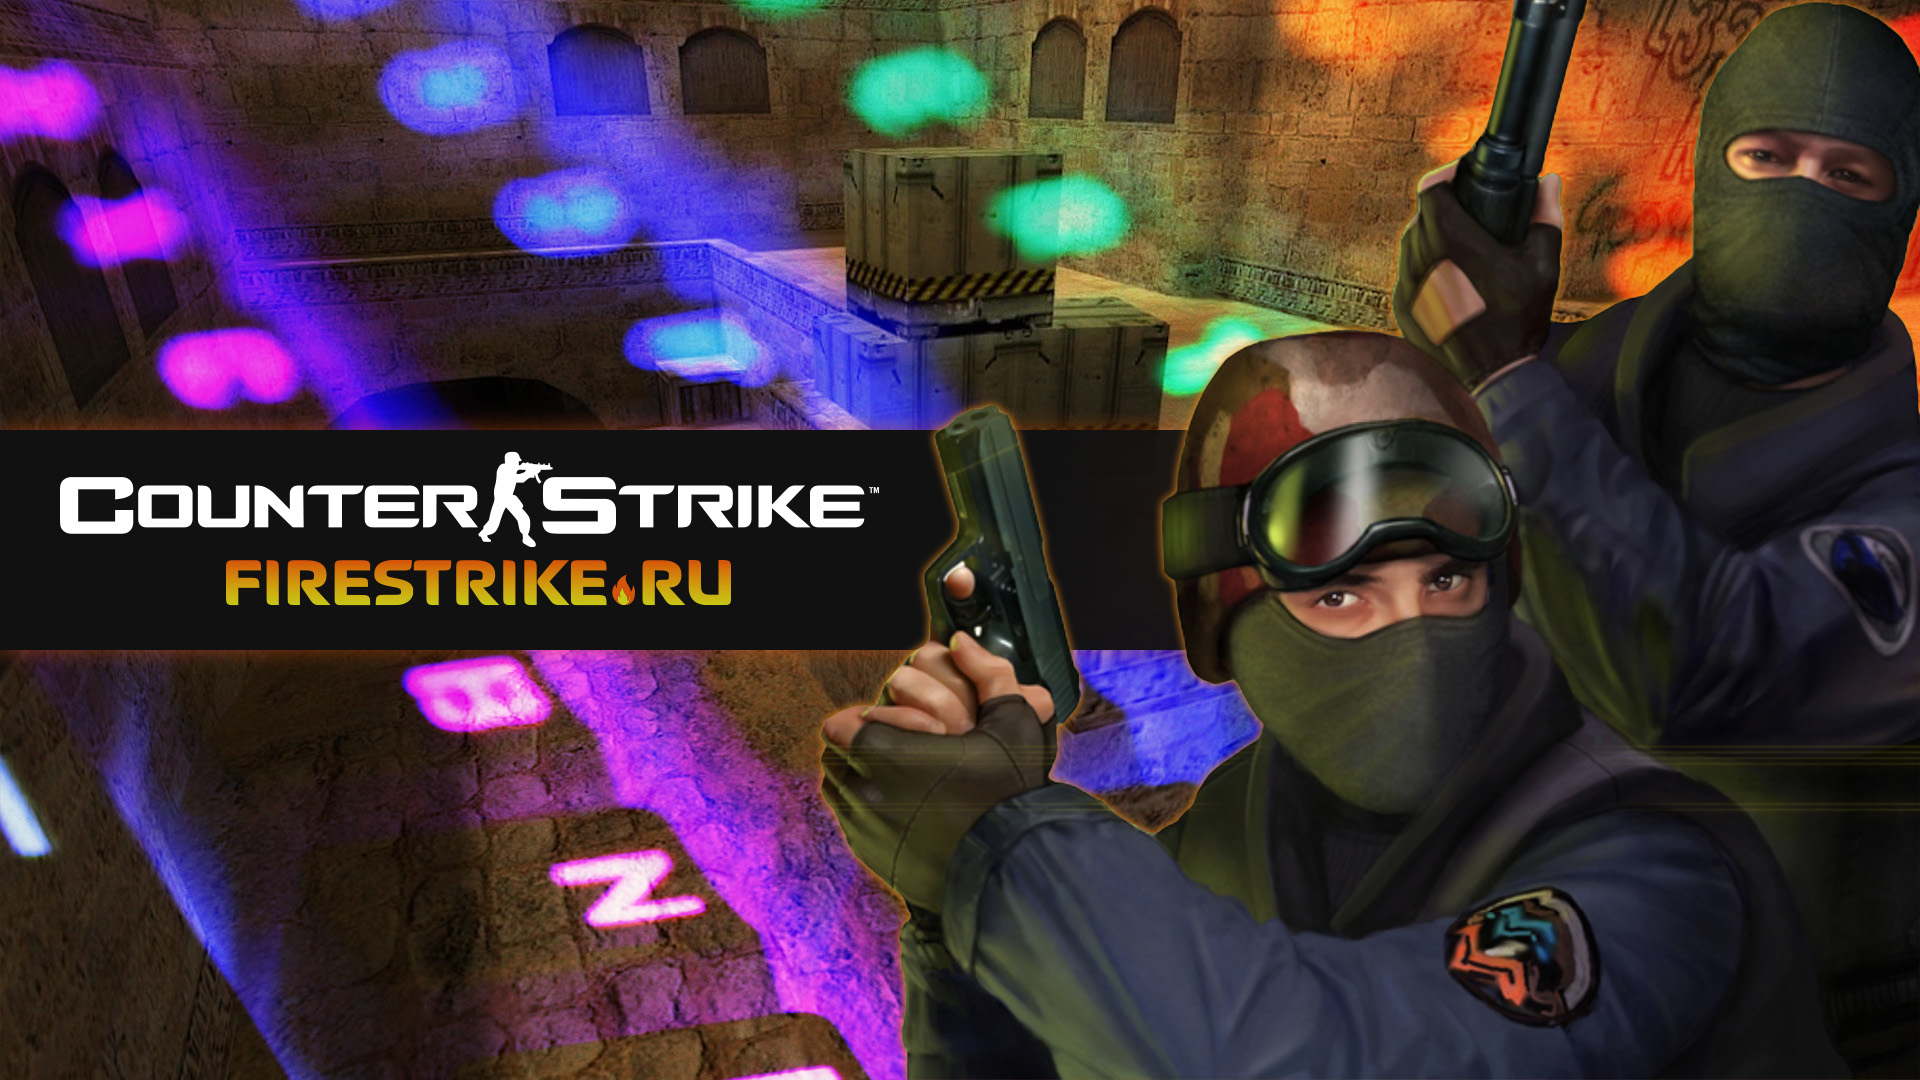 My project in Counter-Strike